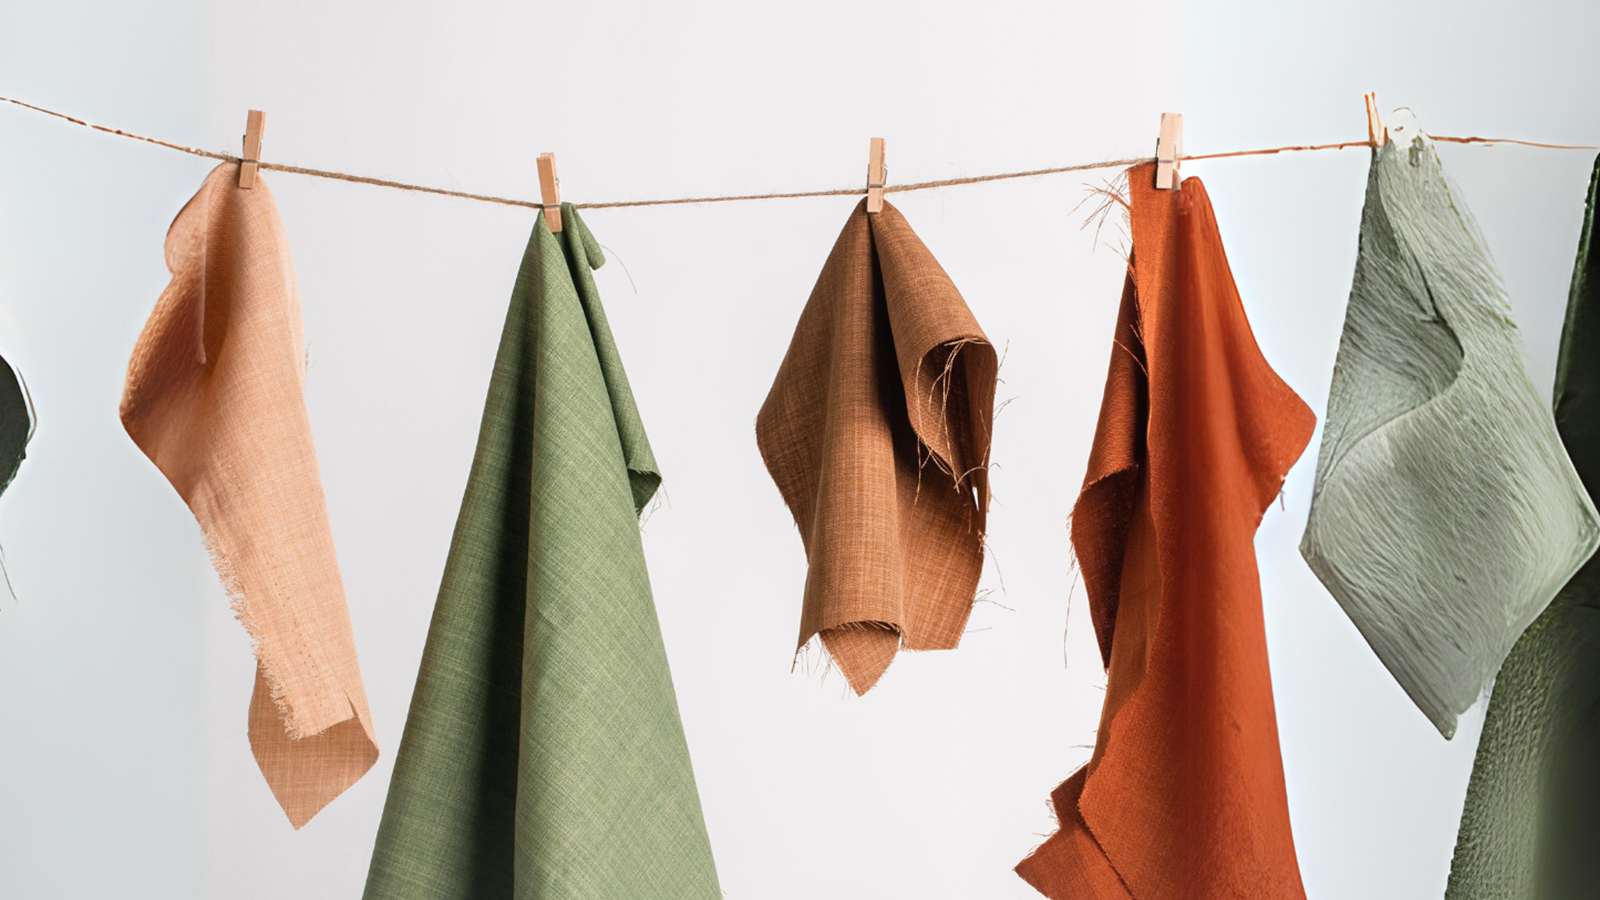 A group of fabrics hanging on a clothes line.